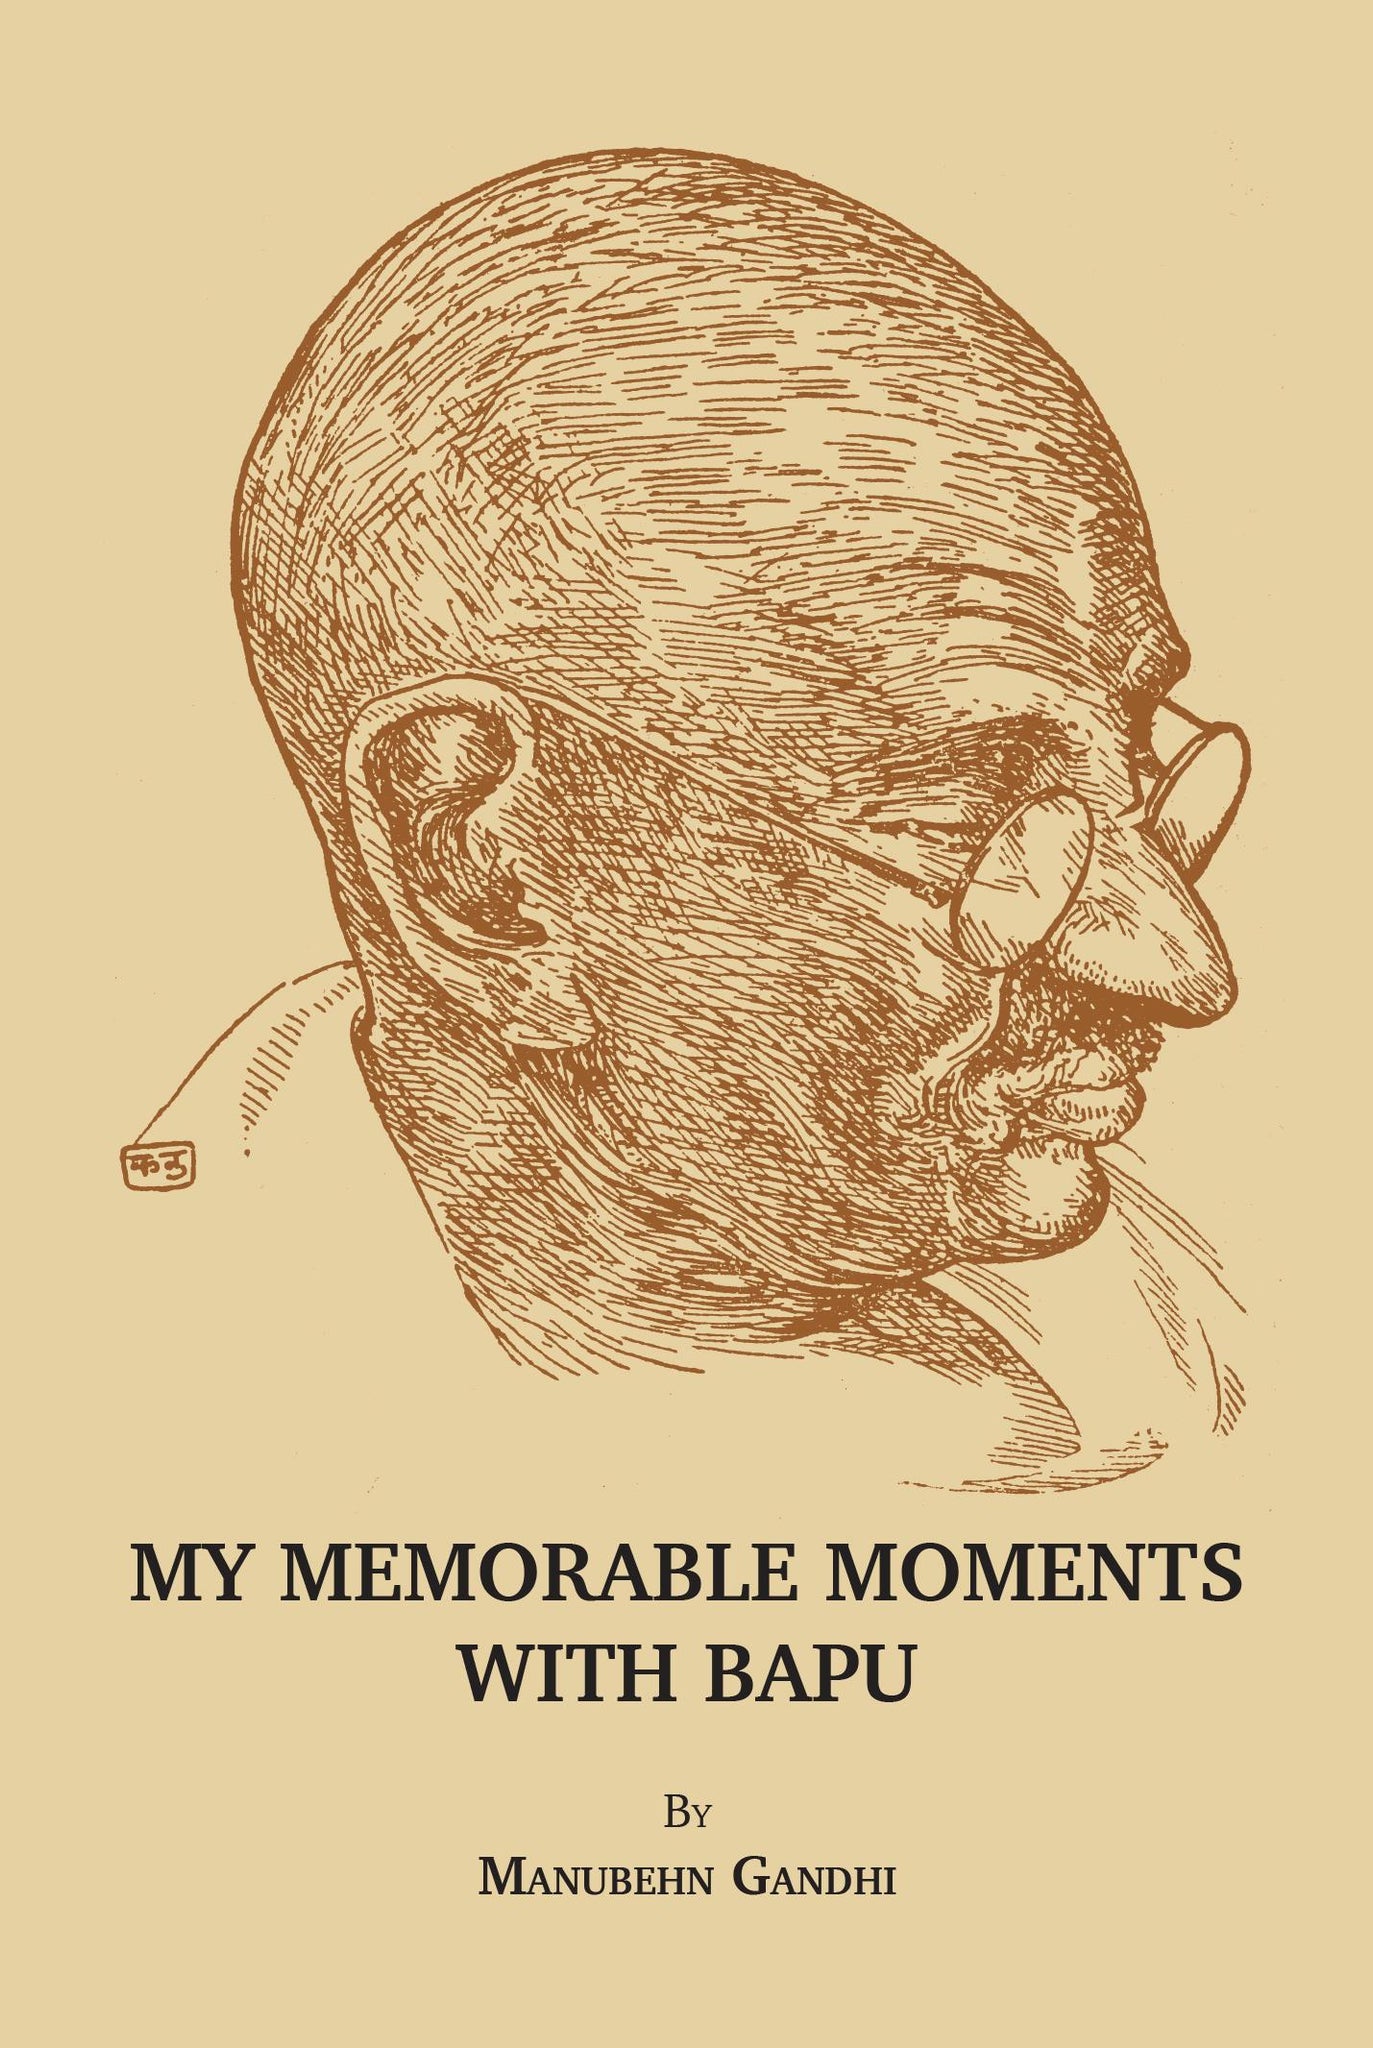 My Memorable Moments with Bapu (My Memorable Moments with Bapu)